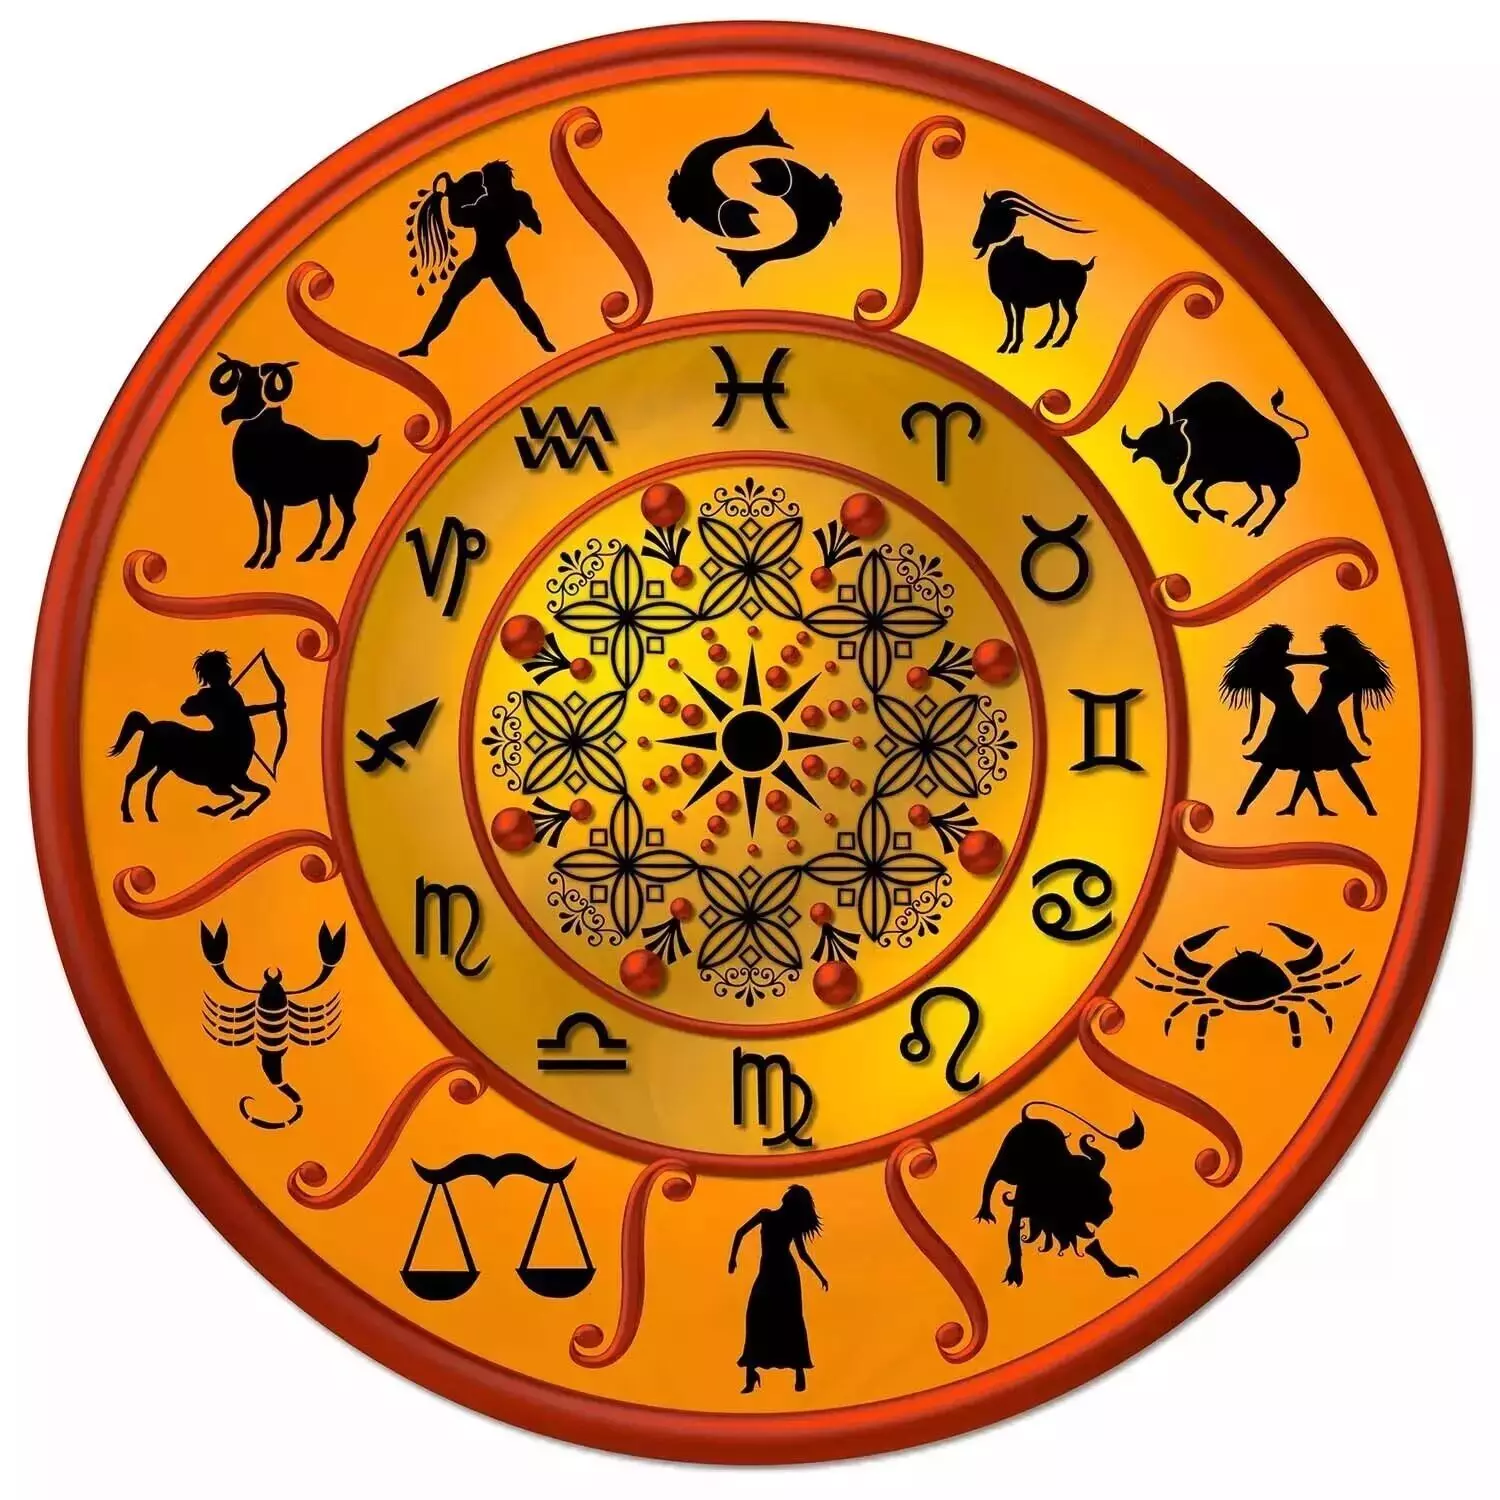 20 June  – Know your todays horoscope